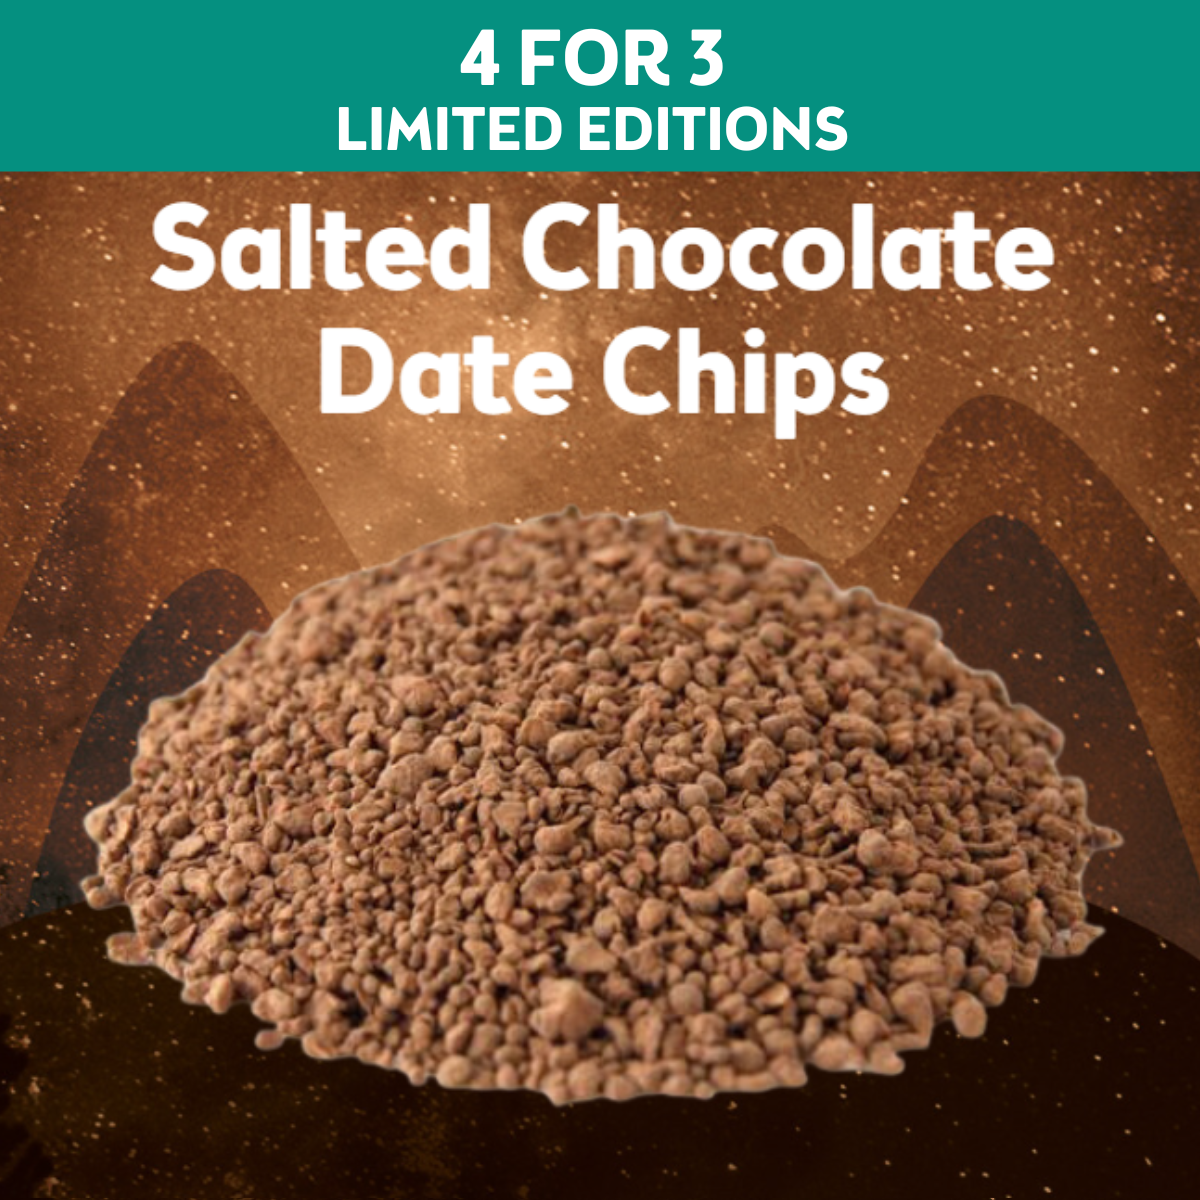 Salted Chocolate Date Chips